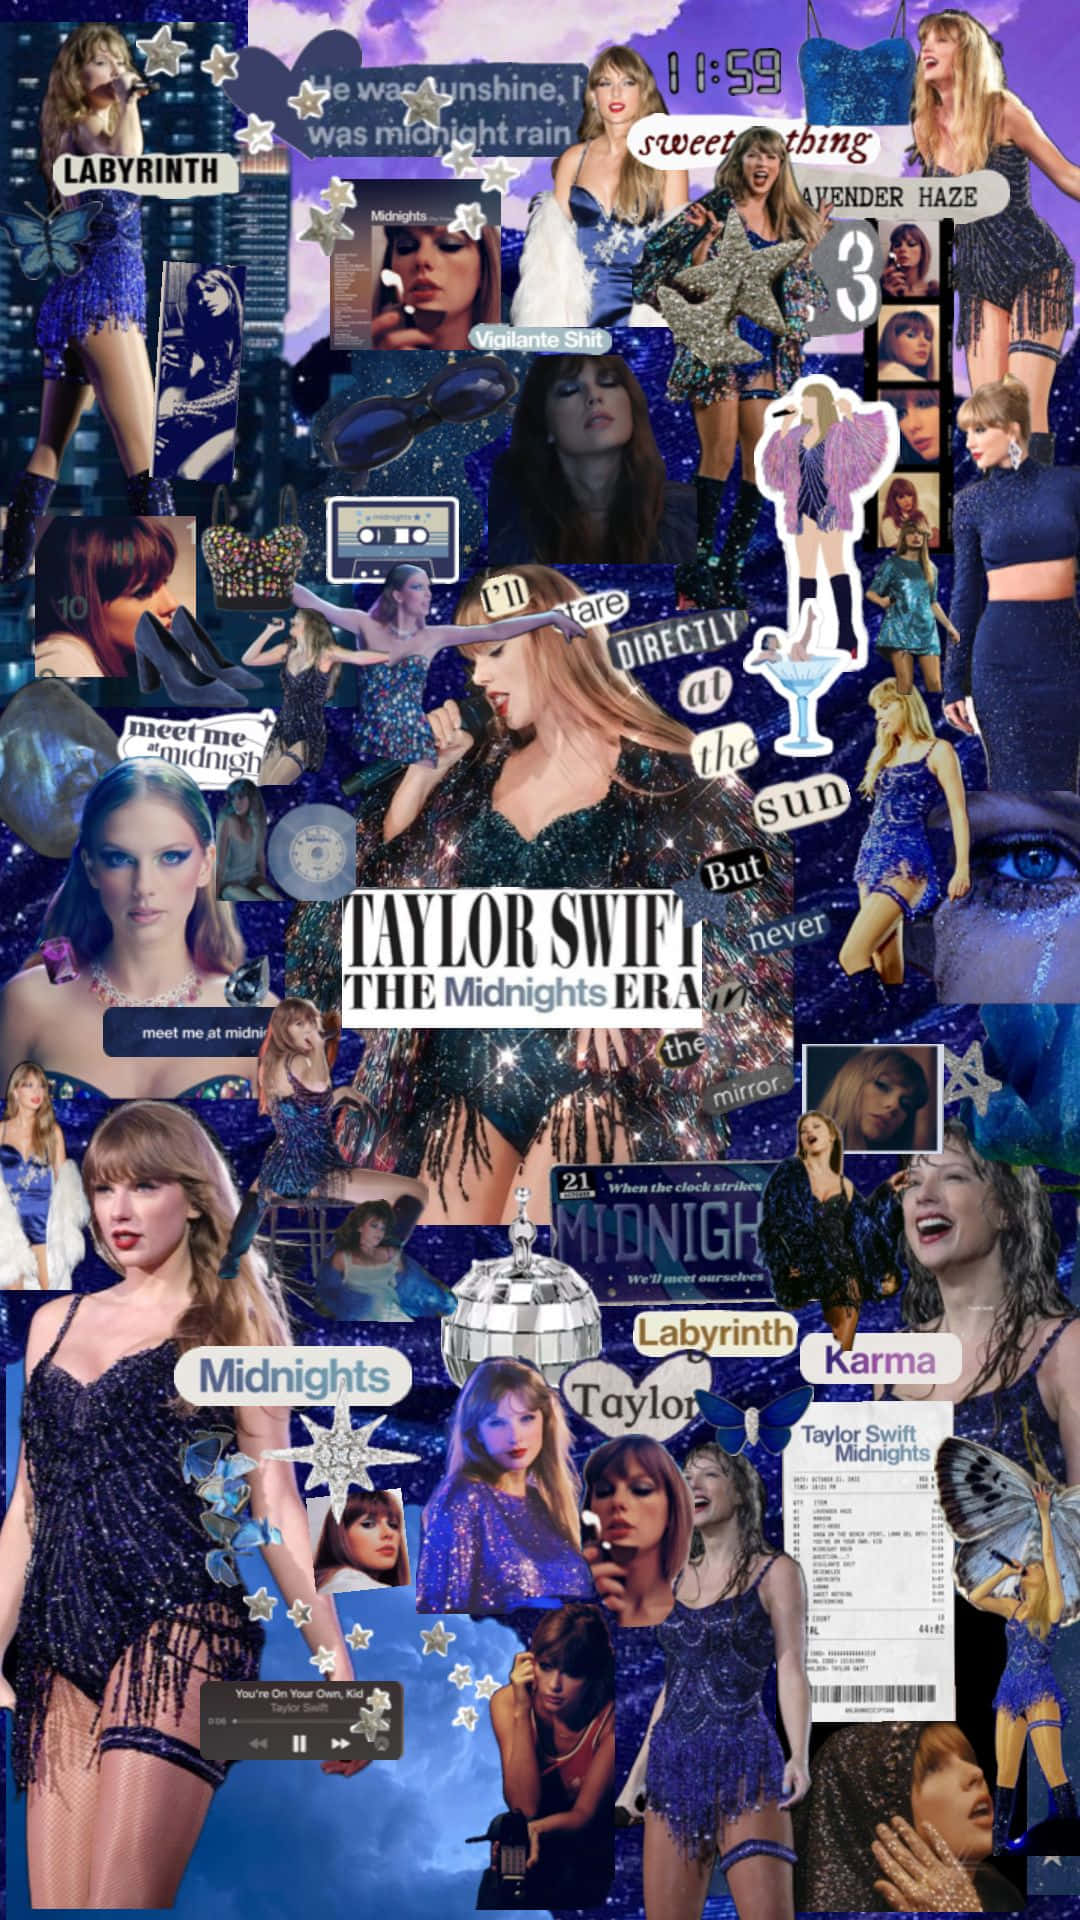 Taylor Swift Midnights Collage Wallpaper